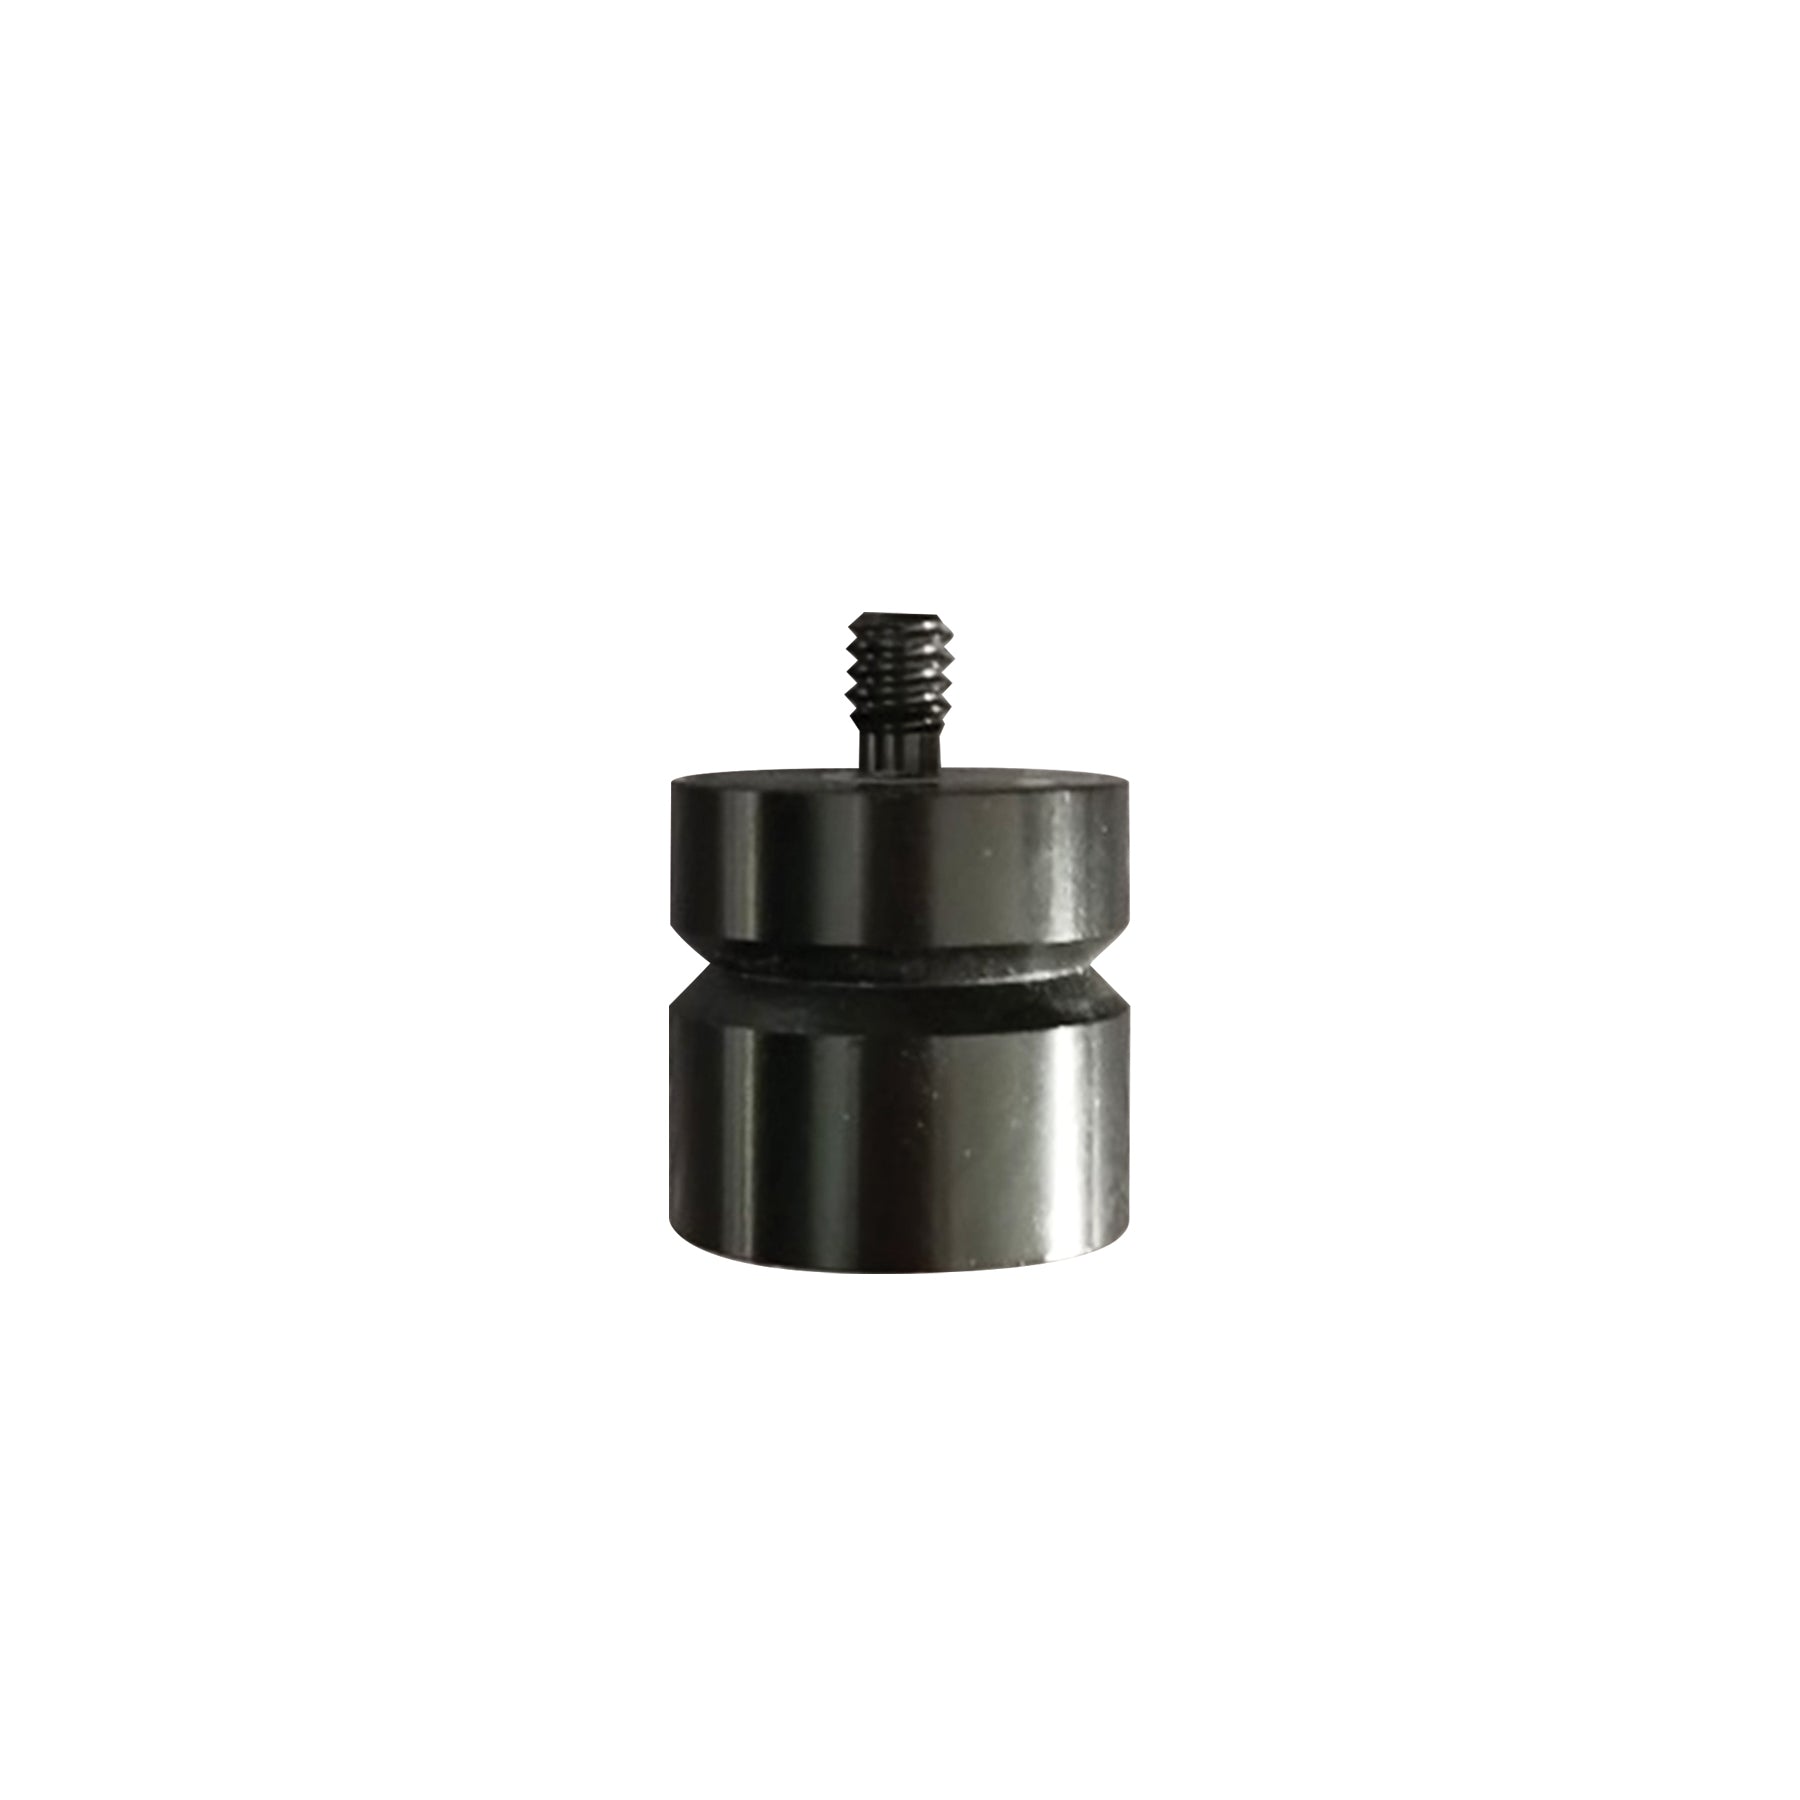 SitePro 07-2131 Adapter 5/8-11 Female To 1/4-20 Male